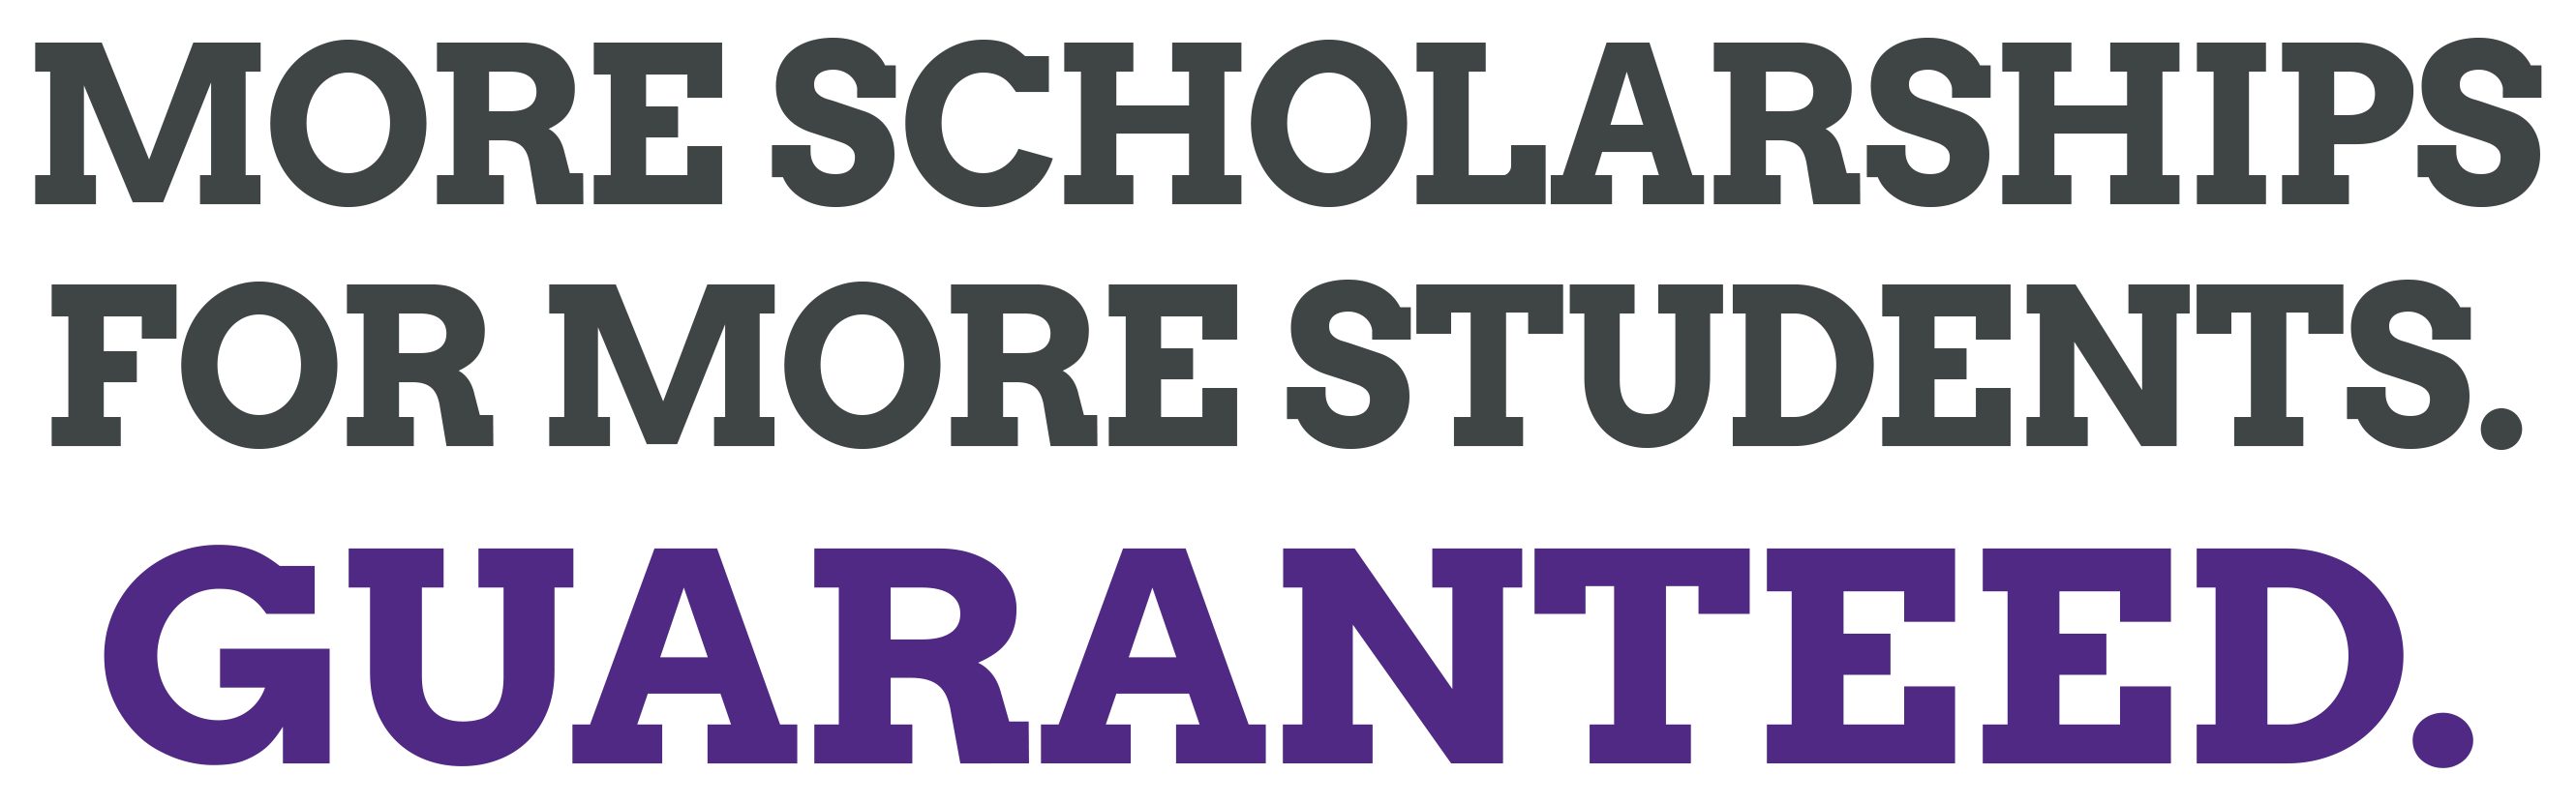 More scholarships for more students, guaranteed.